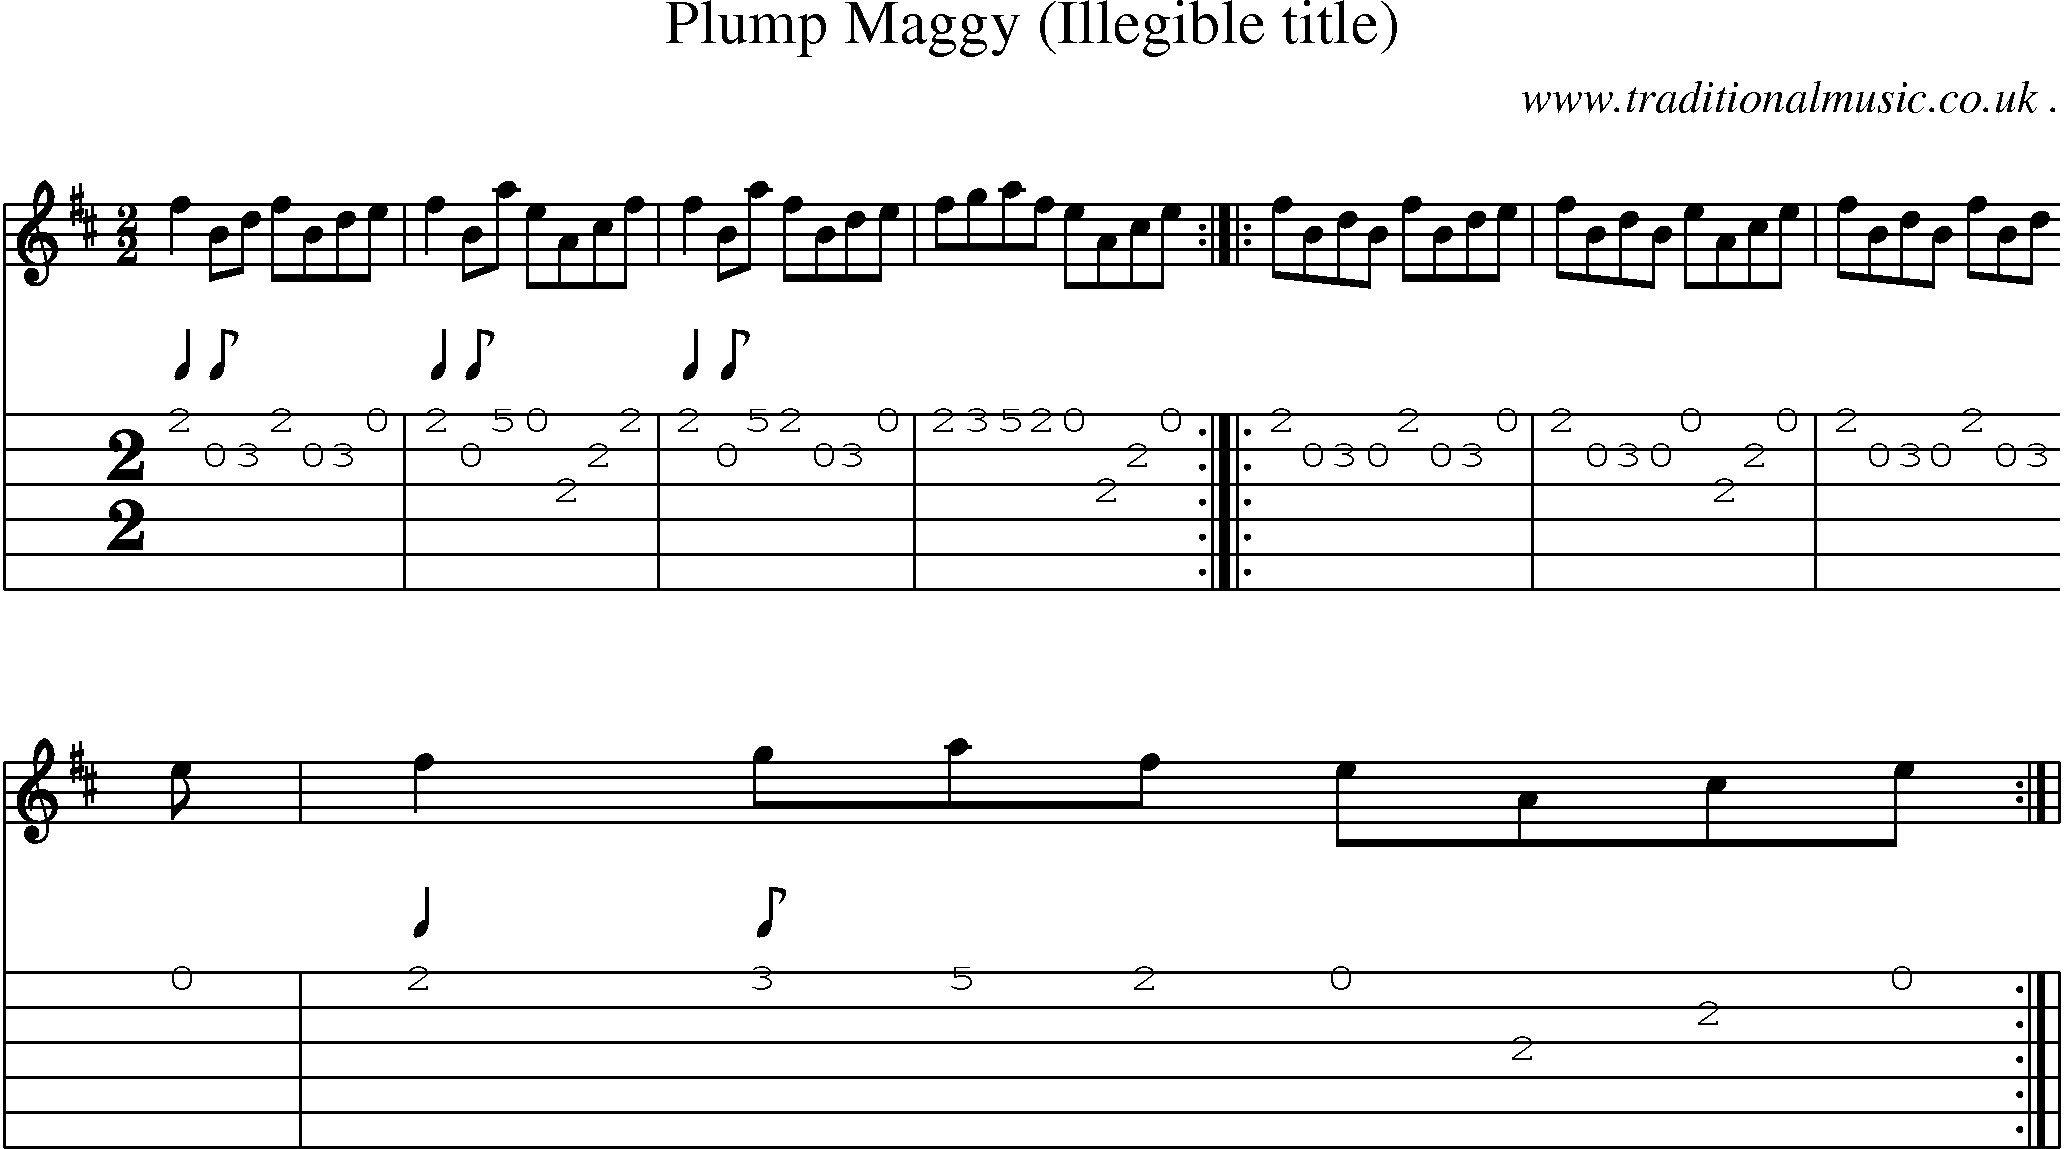 Sheet-Music and Guitar Tabs for Plump Maggy (illegible Title)